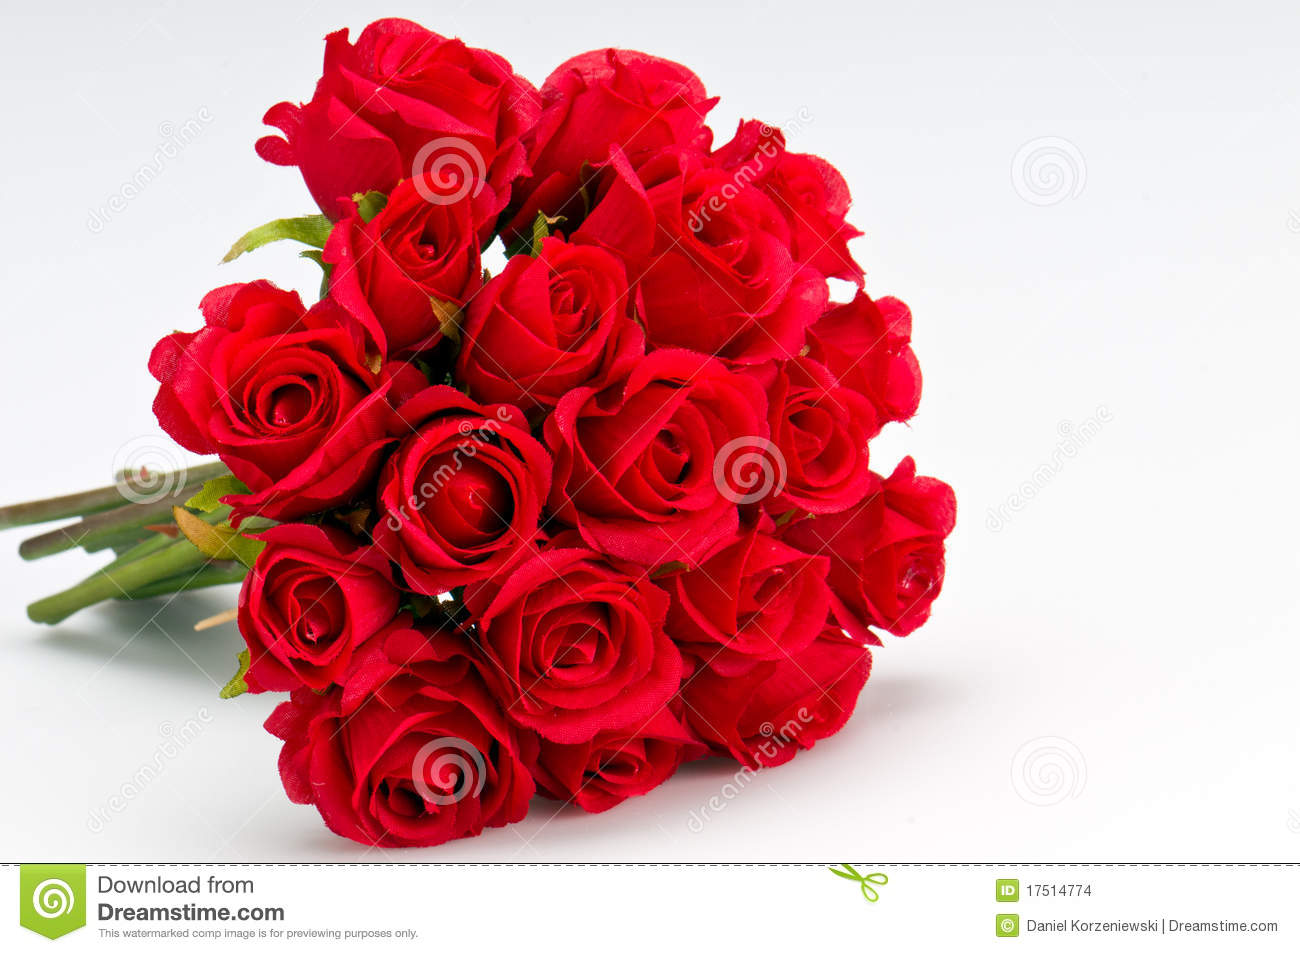 Bouquet Of Roses Stock Images   Image  17514774